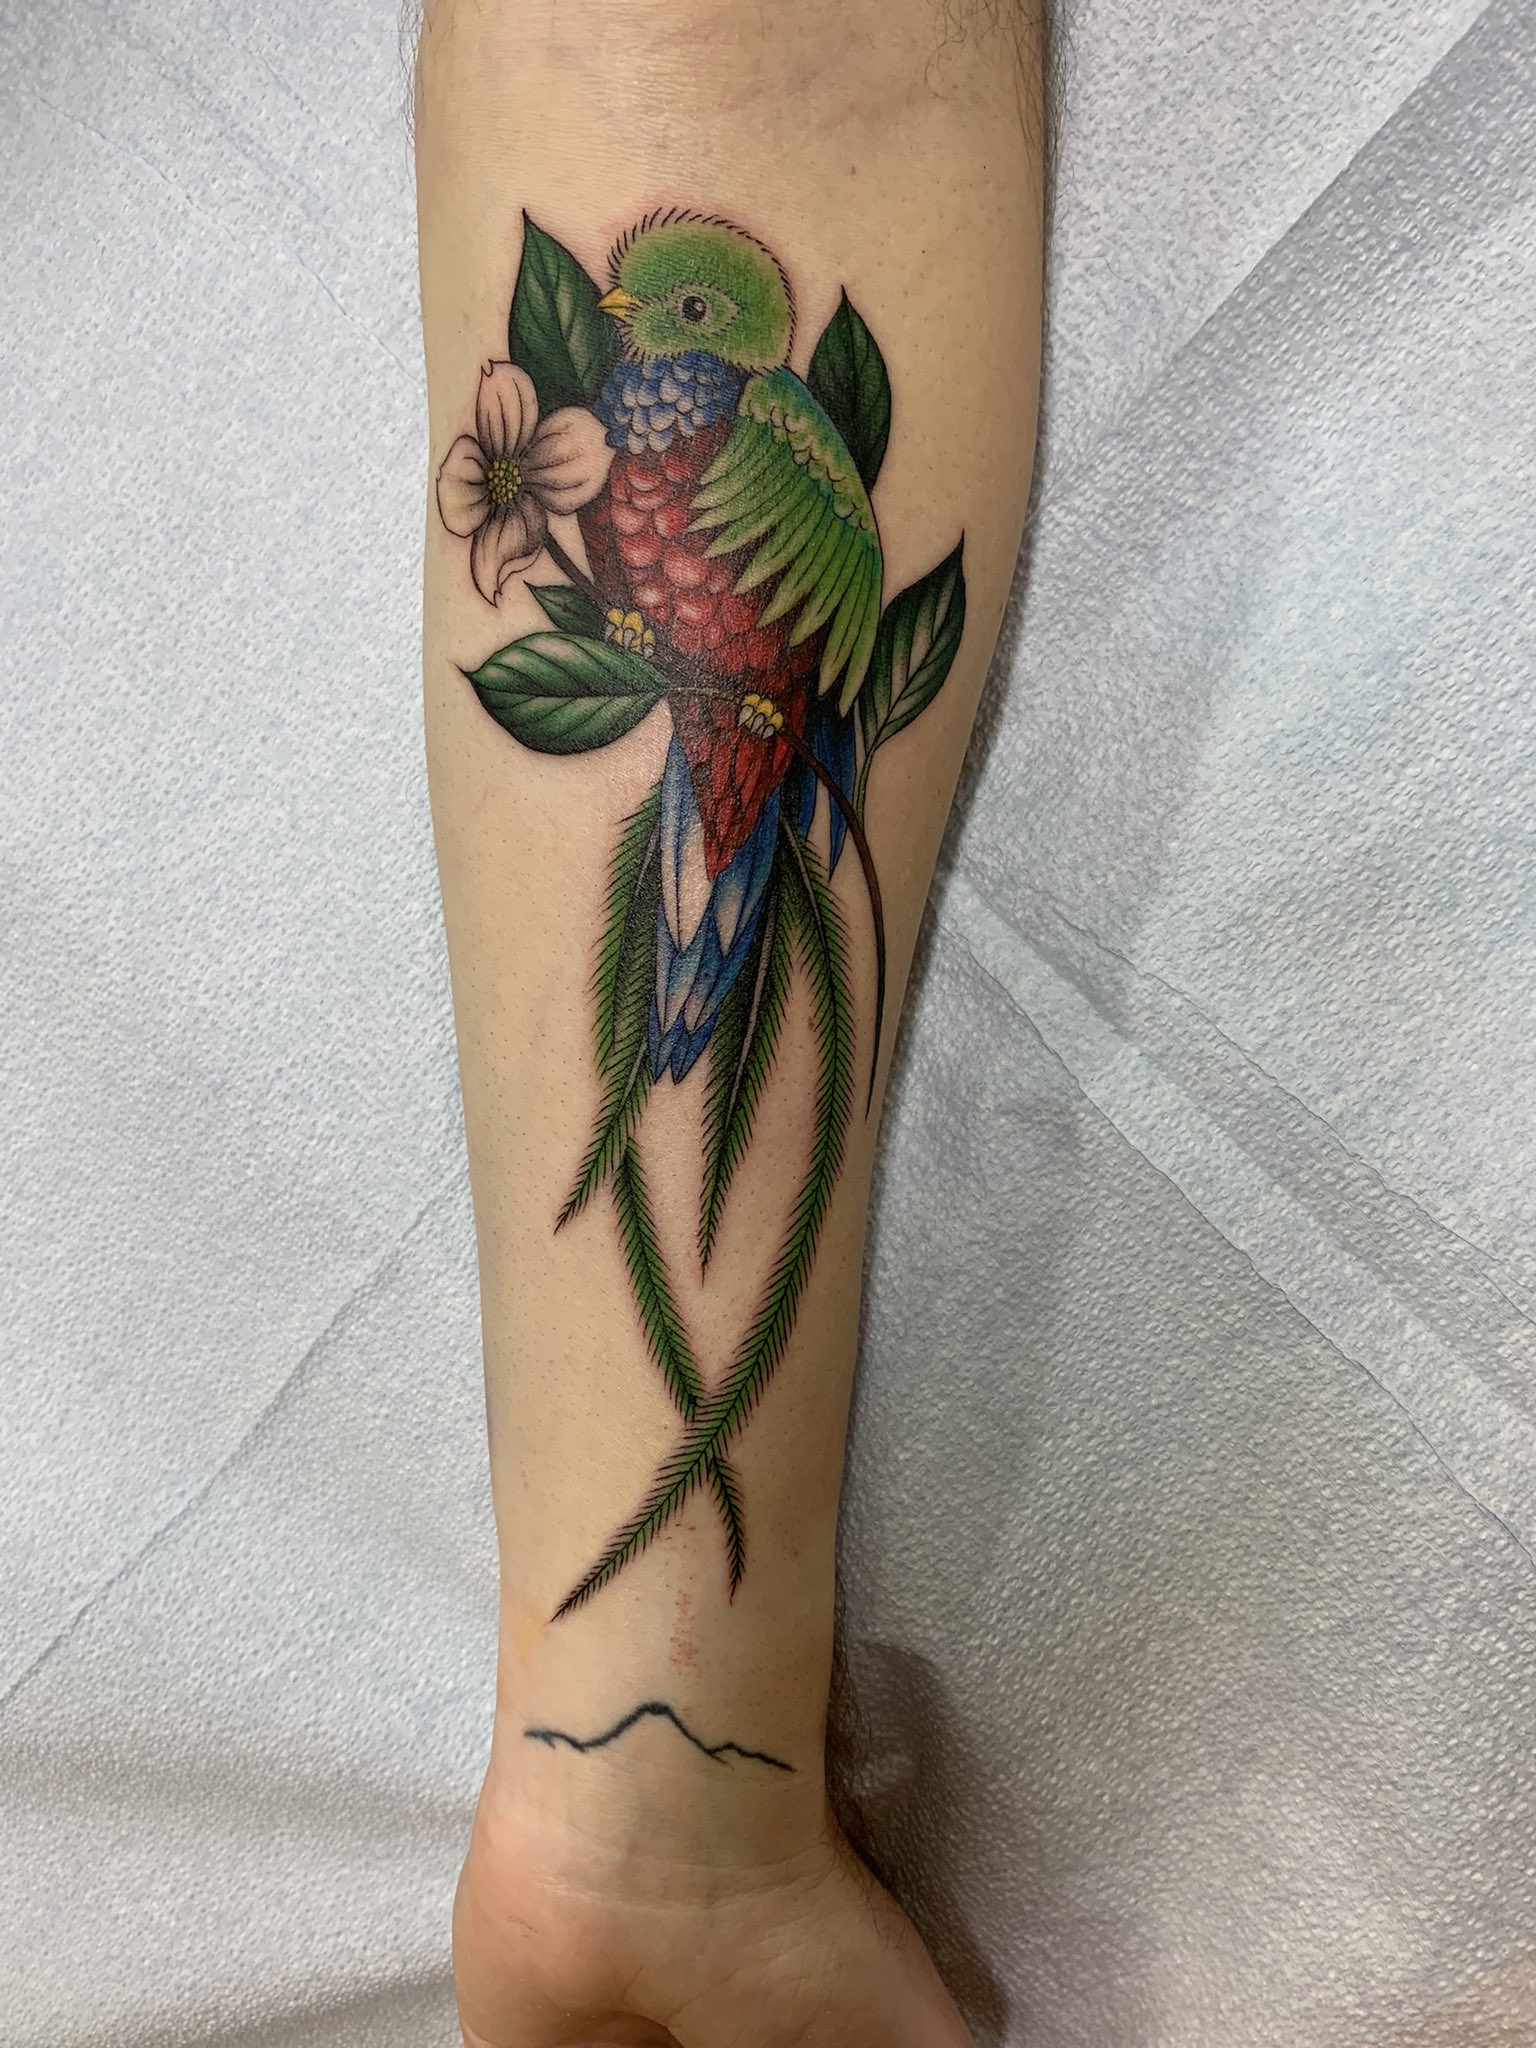 Blessed By Jessla on Instagram Heres a beautiful Cover Up of a Quetzal  Bird with Cherry Blossoms around it For appointments email me at  jesusibanez6262gmailcom or